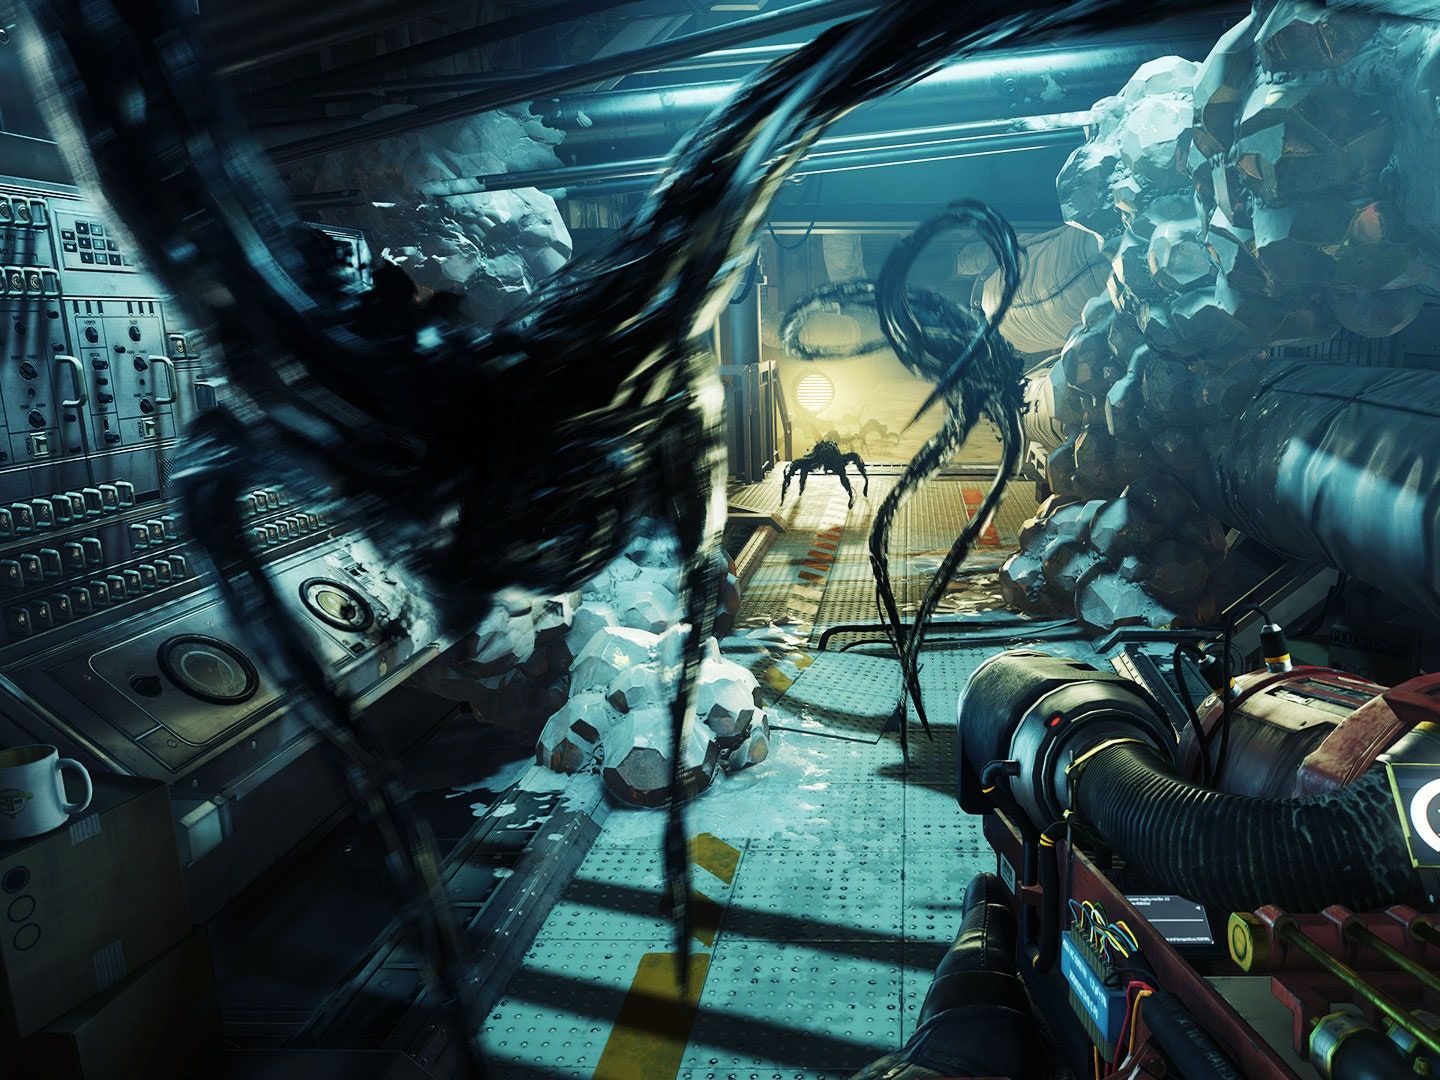 For a Game About Identity, 'Prey' Is Sure Short on Its Own